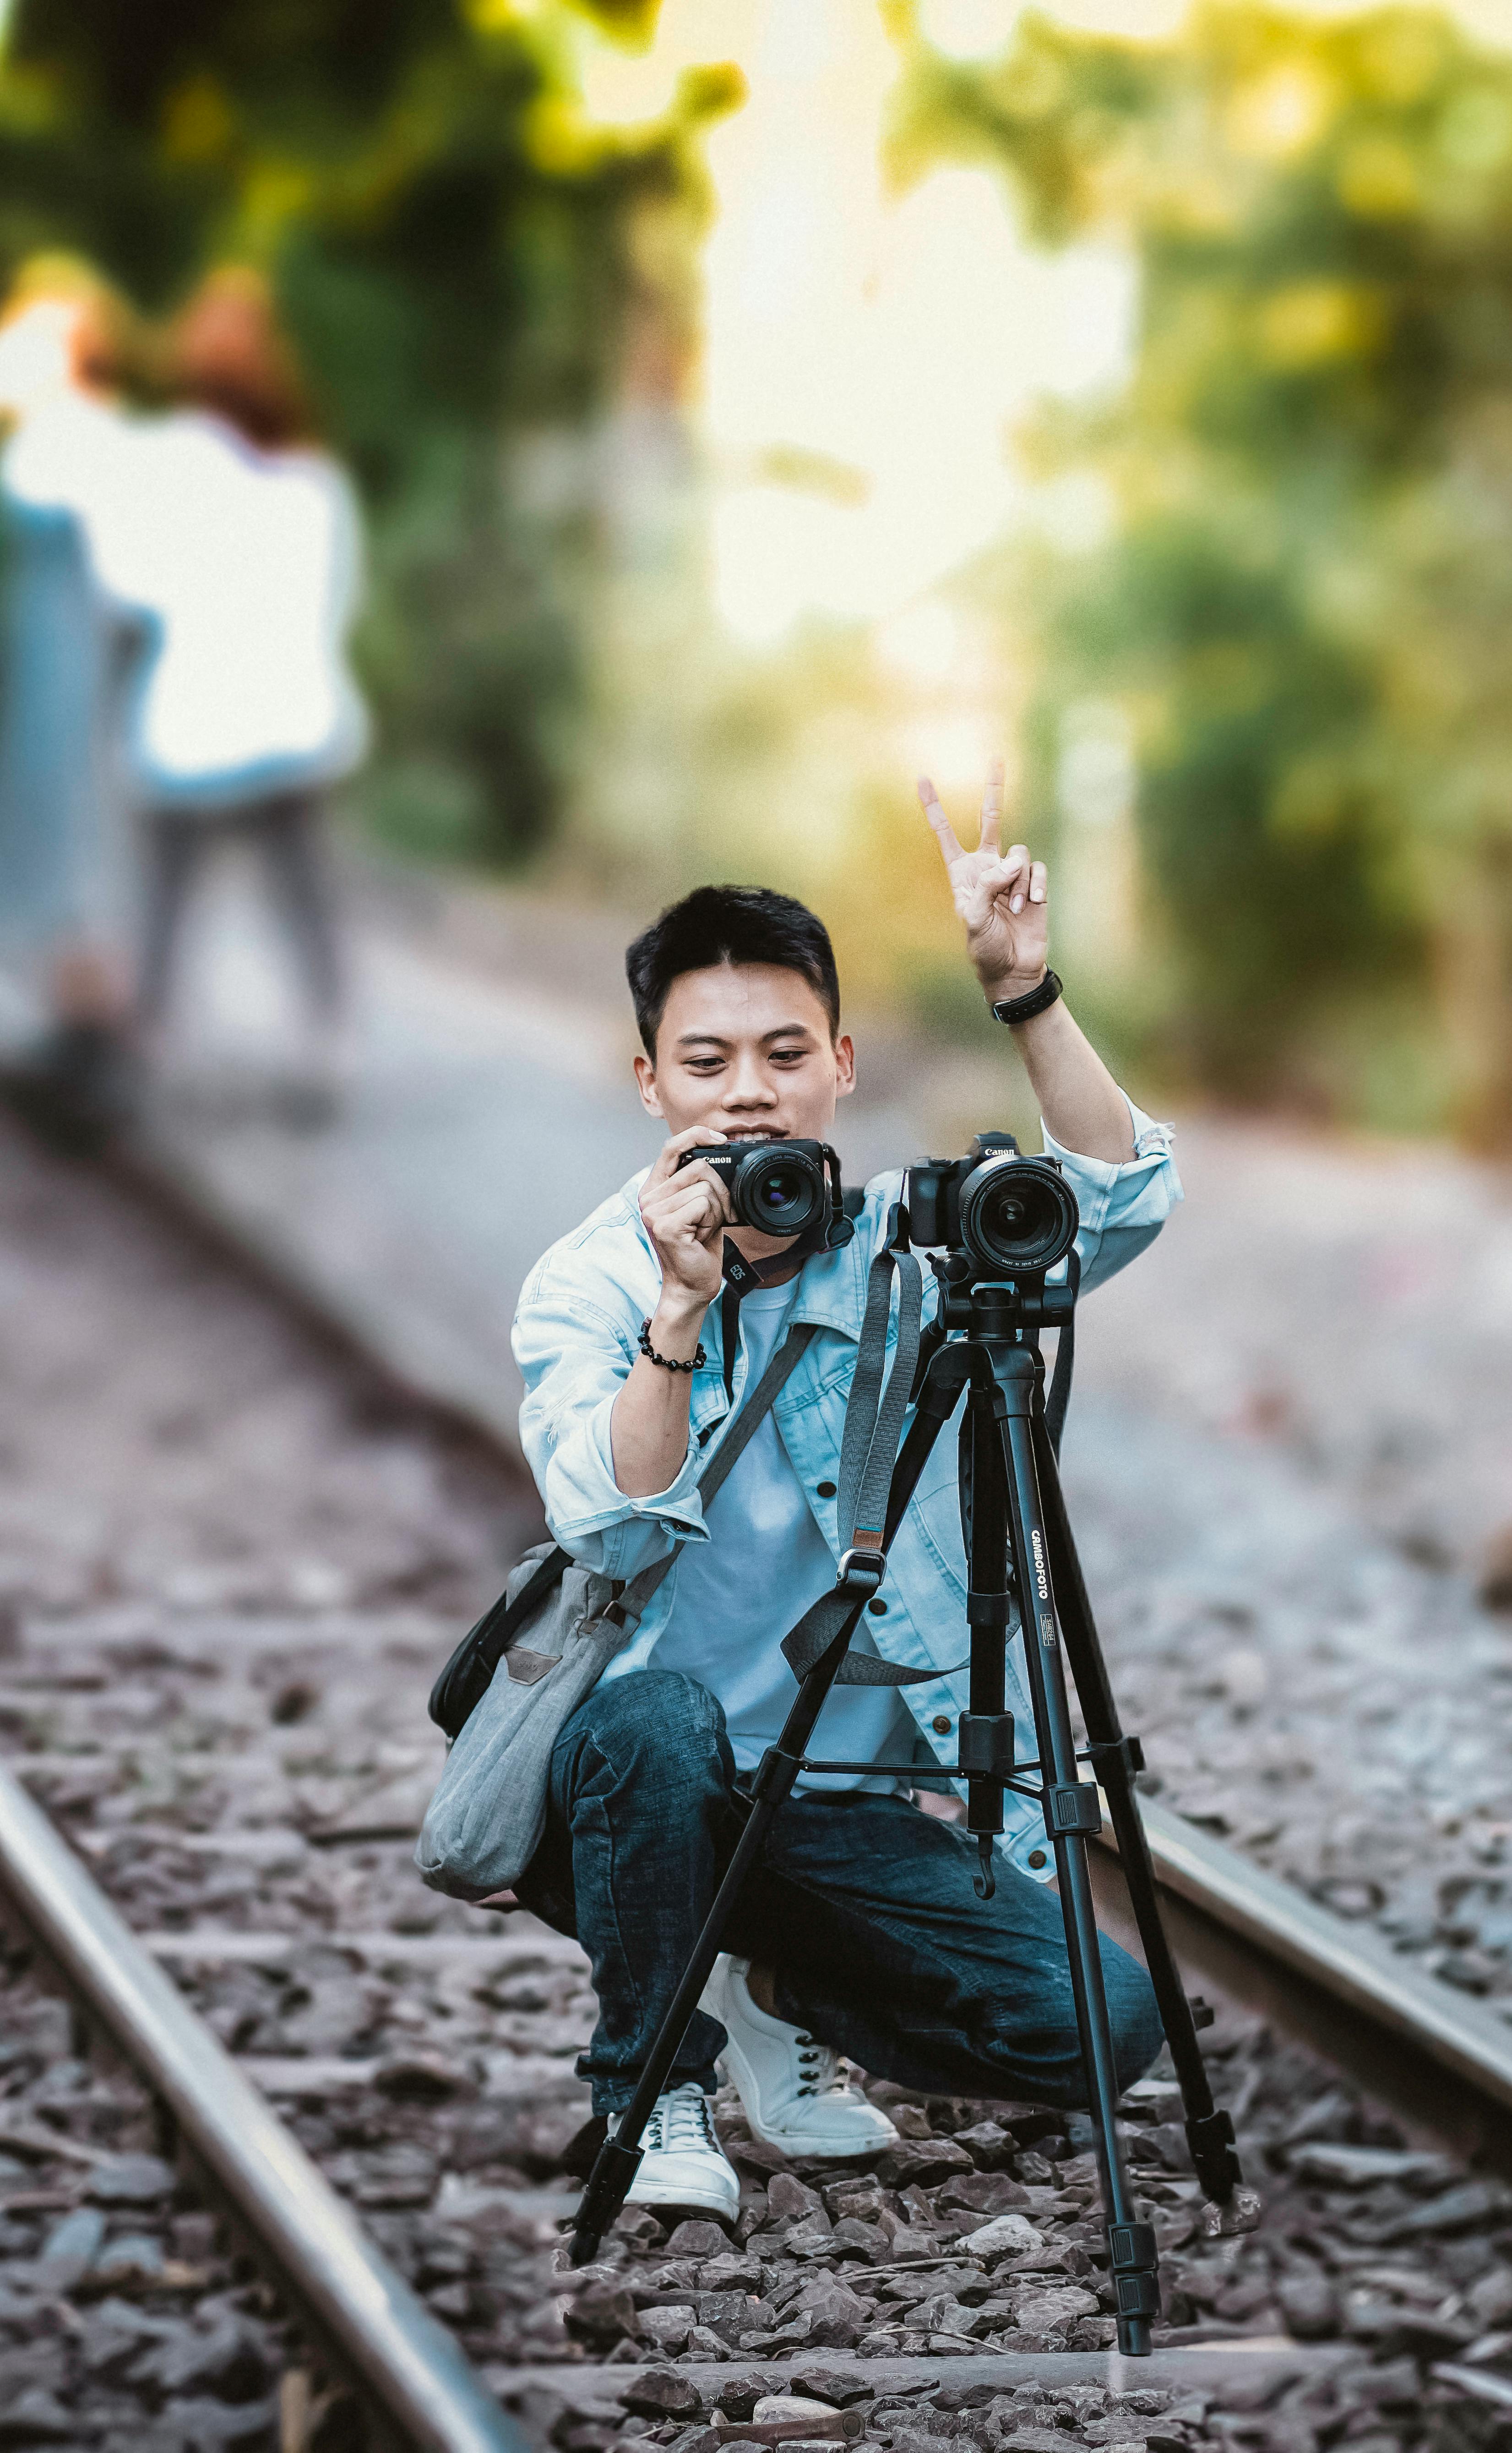 Man with Camera Checking Pictures · Free Stock Photo